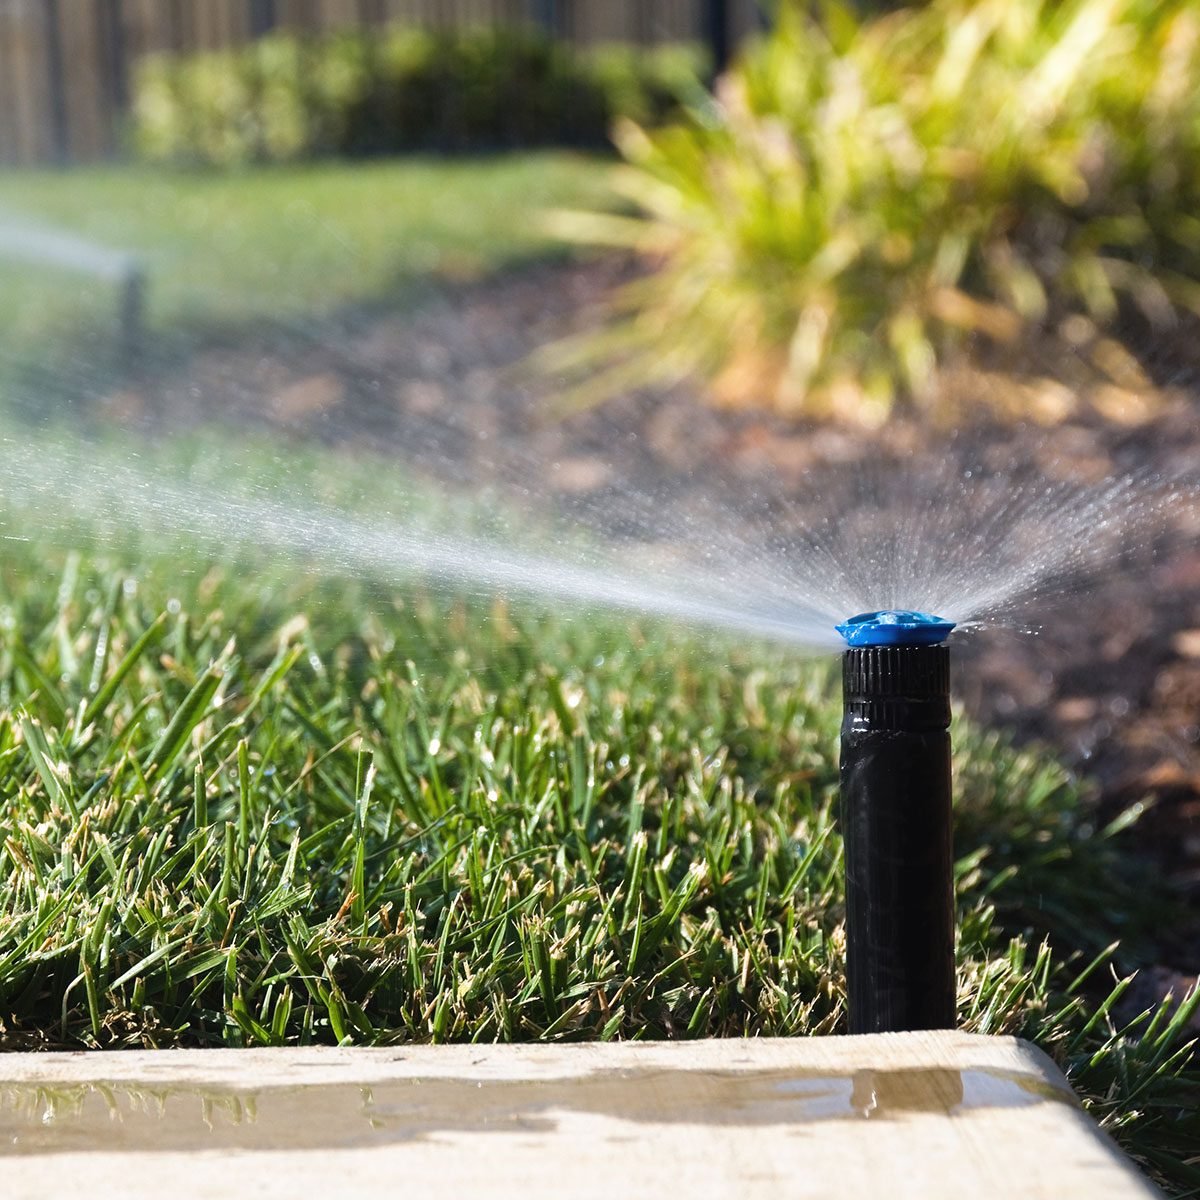 Lawn Sprinkler Systems: 6 Common Mistakes & How to Avoid